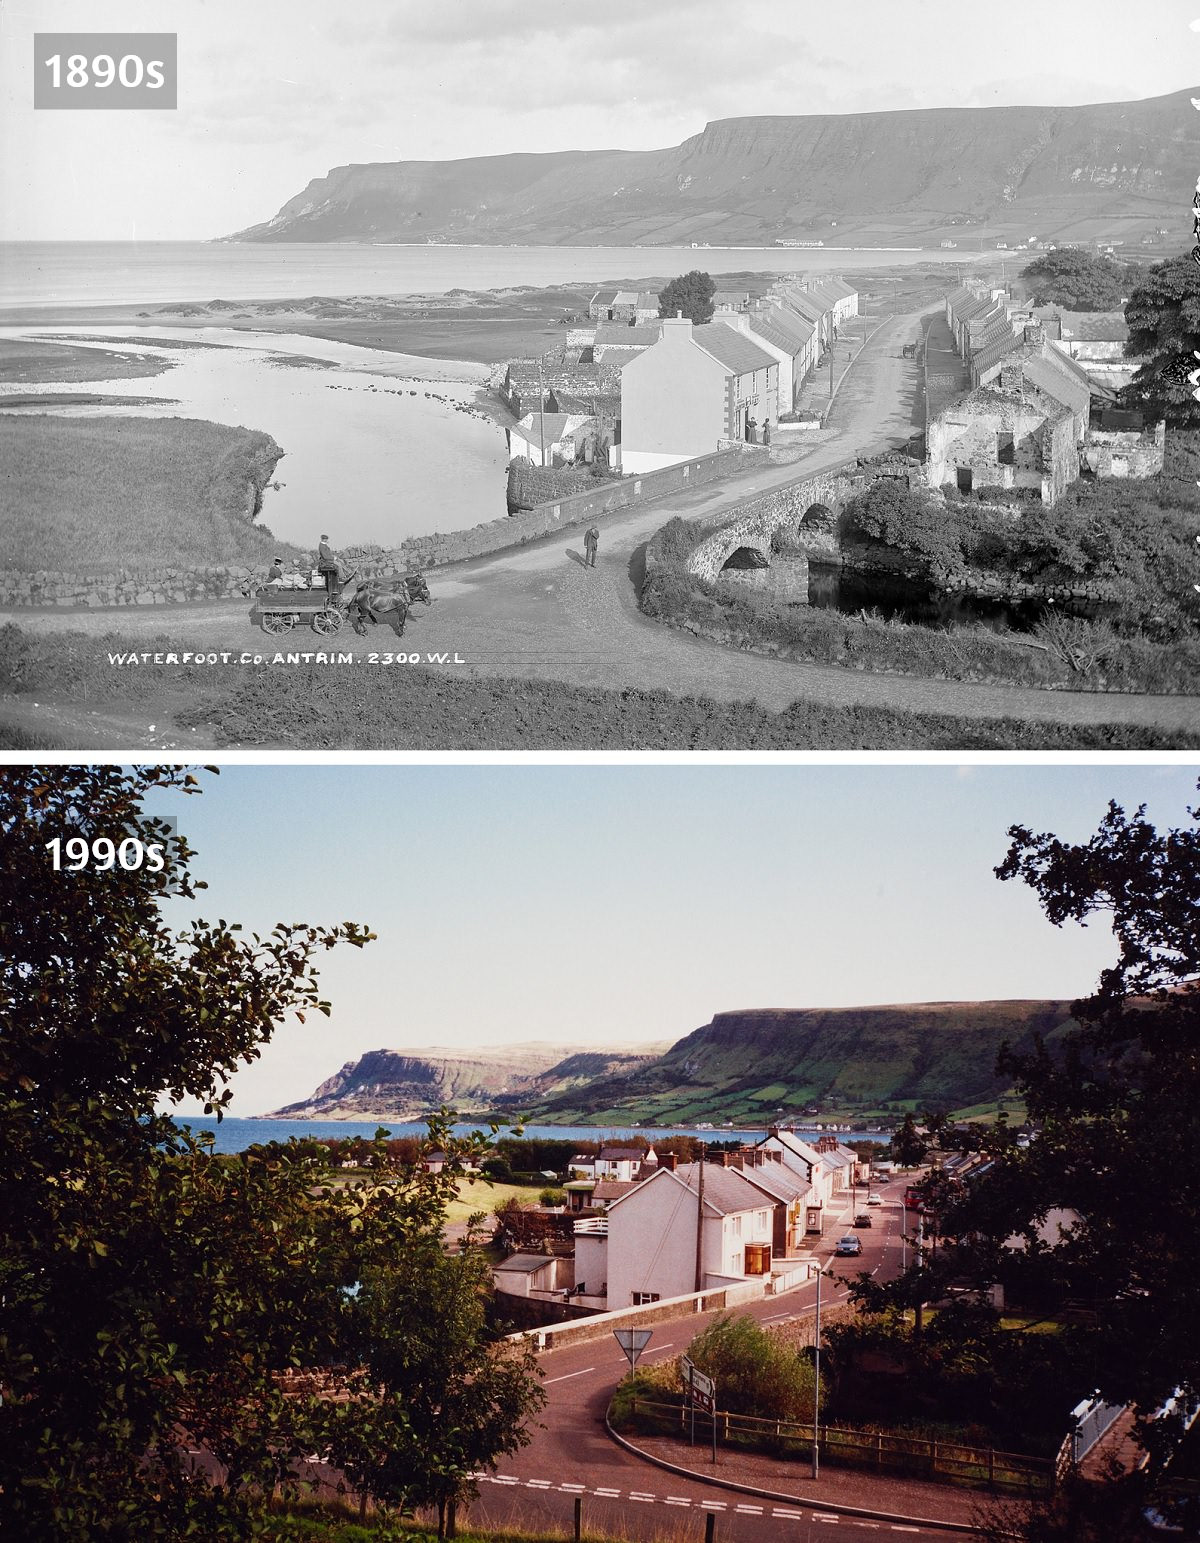 Waterfoot, Co. Antrim, 1890-1990